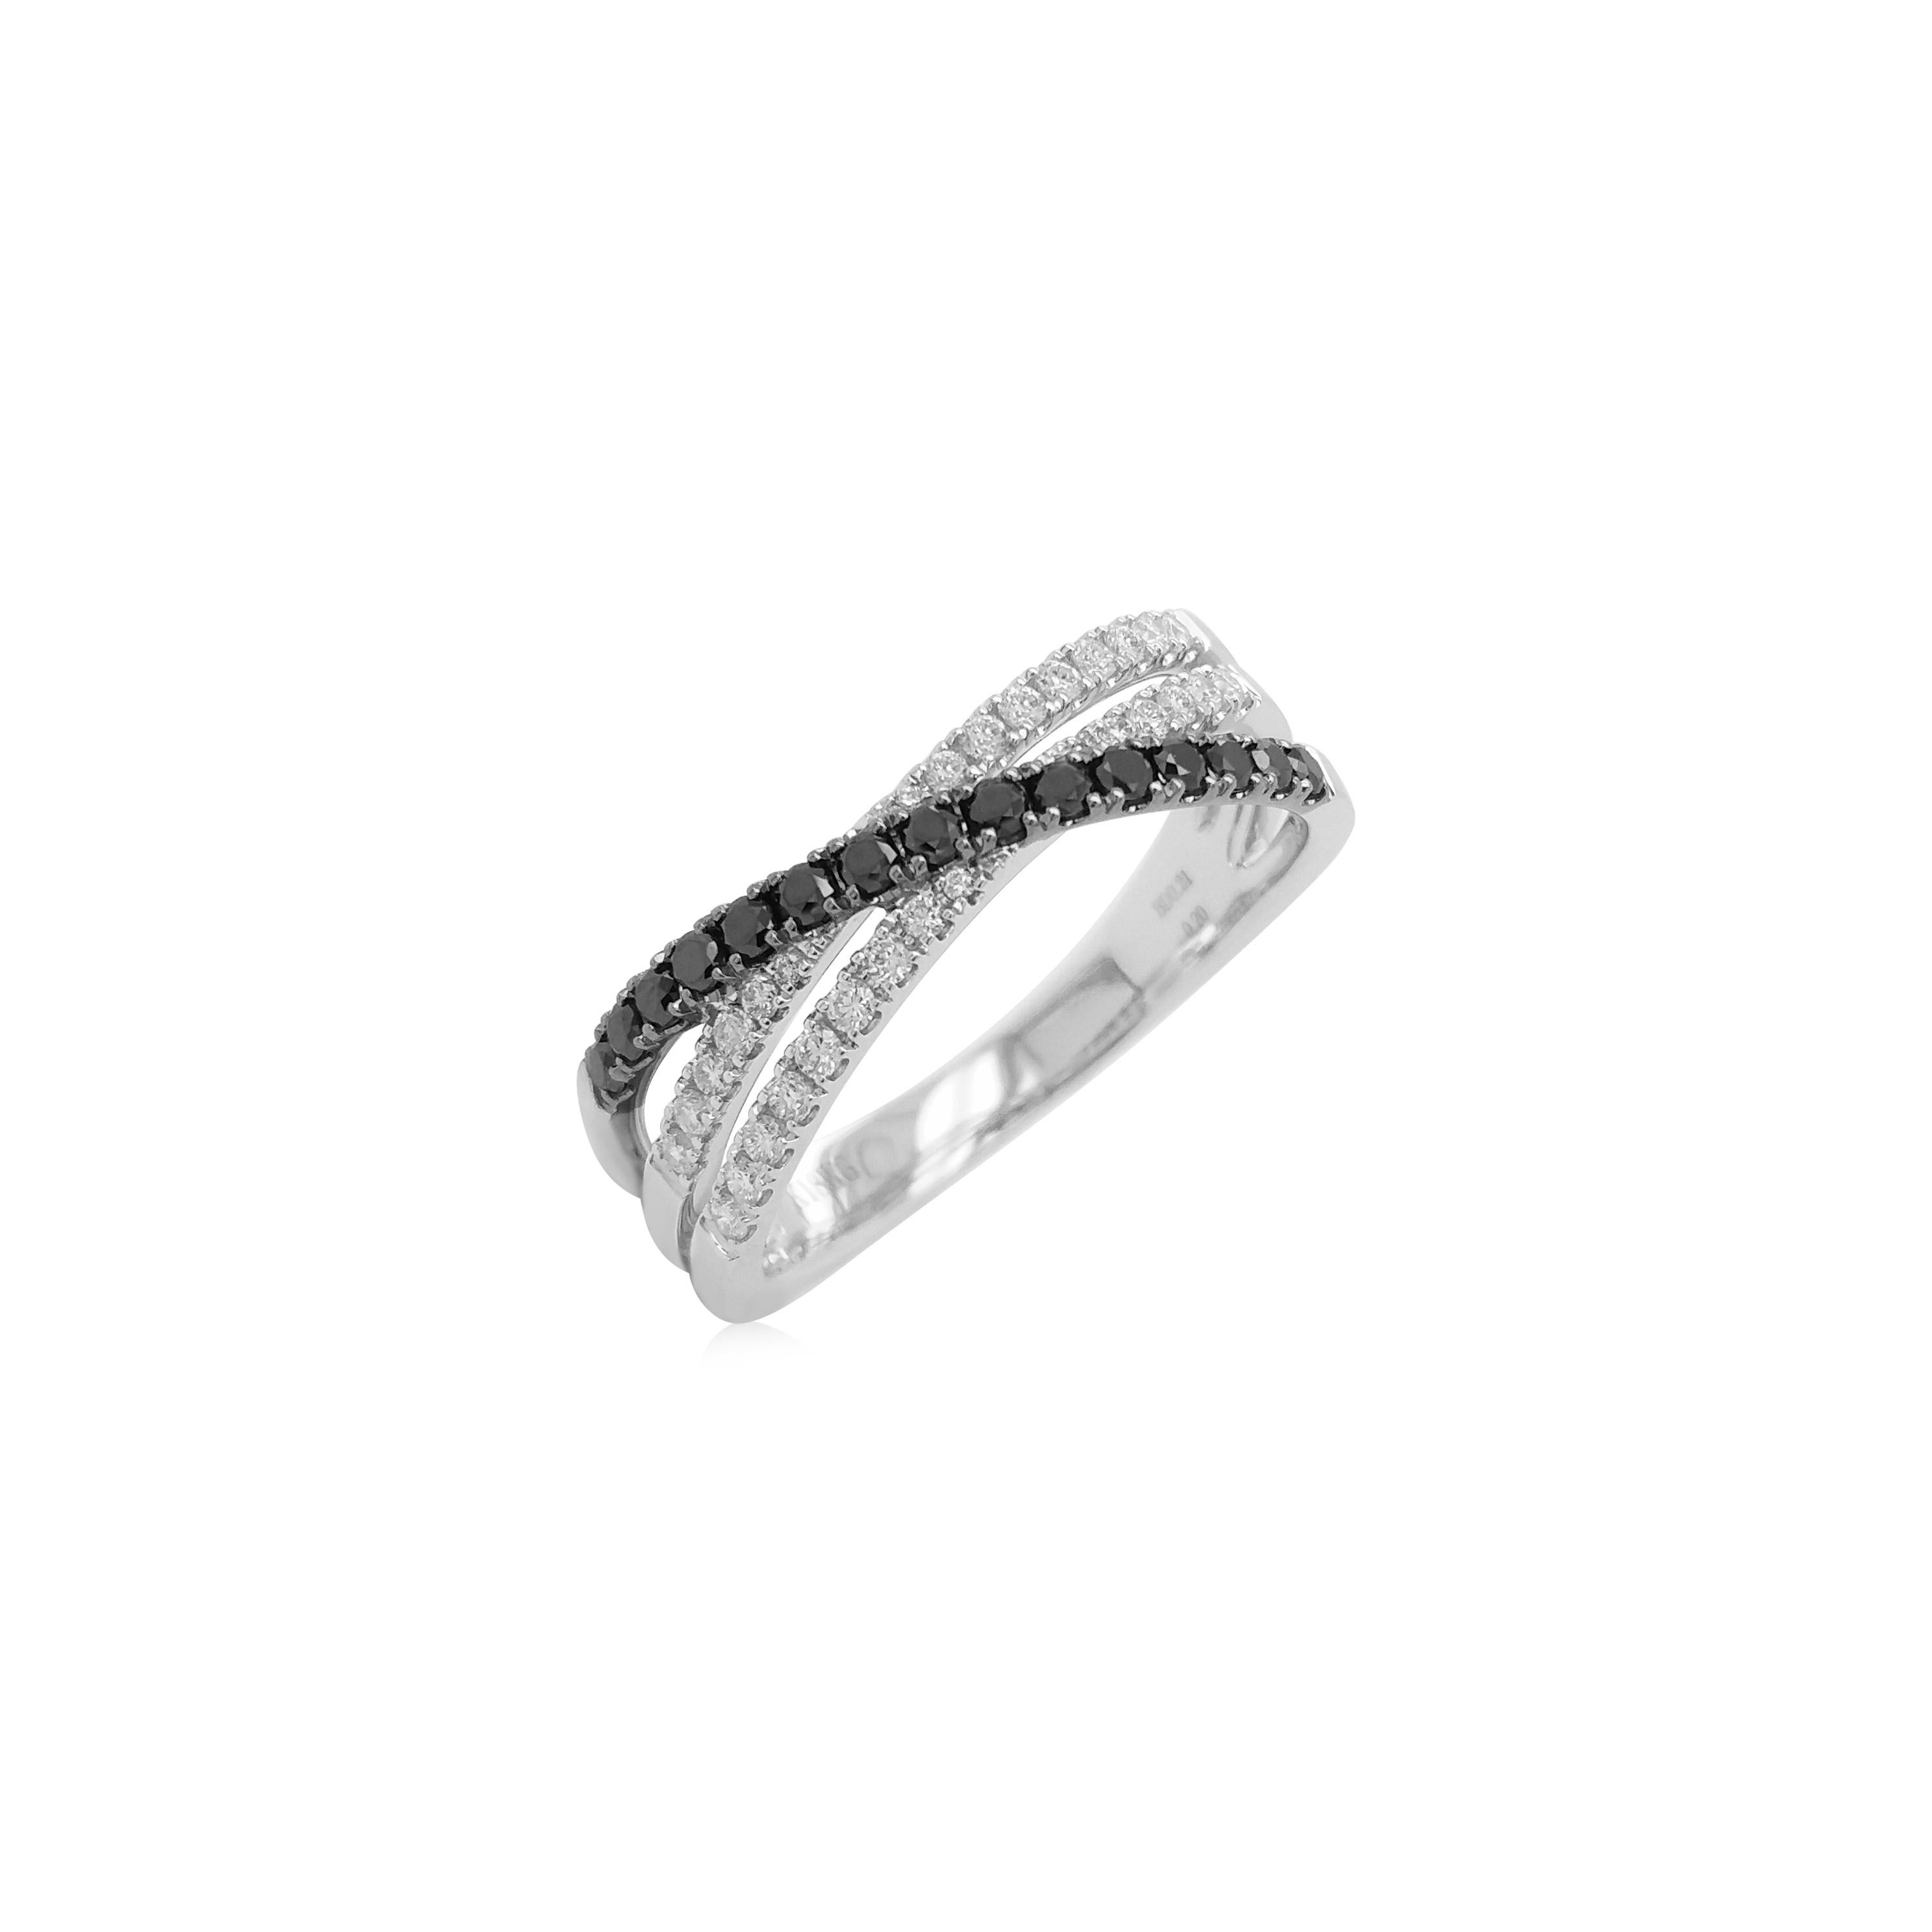 Round Cut Modern Band Ring in Black Diamonds and White diamonds made in 18K Gold For Sale